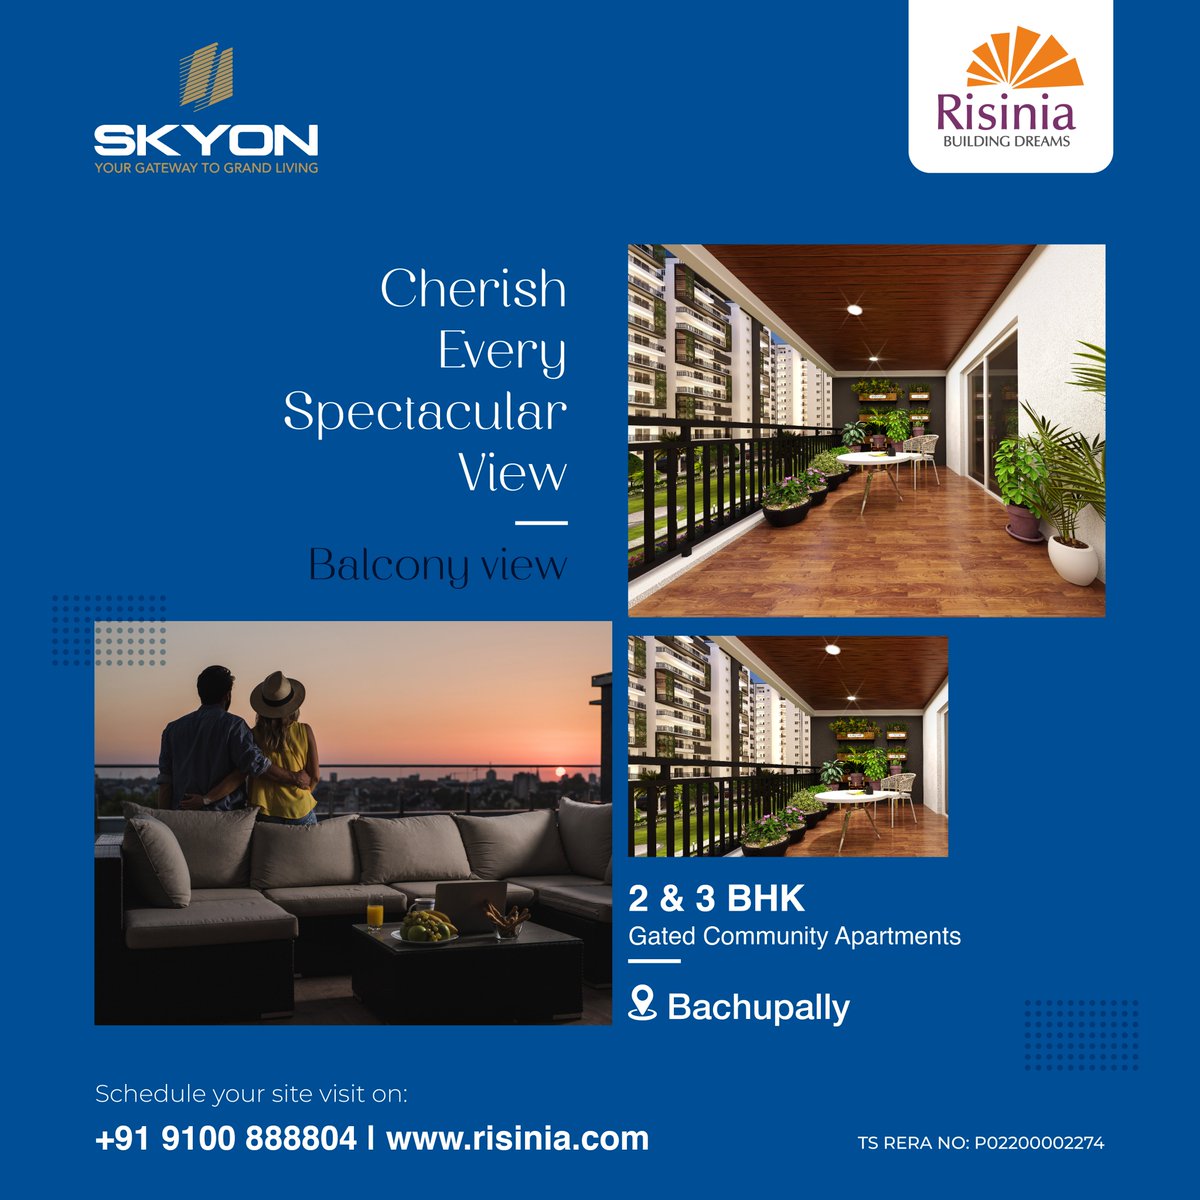 The spacious balcony offers an uncluttered view of Bachupally, allowing you to immerse yourself in serenity during your evenings.

#risinia #risiniabuilders #risiniaskyon #2bhkflatsforsaleinbachupally #3bhkflatsforsaleinbachupally